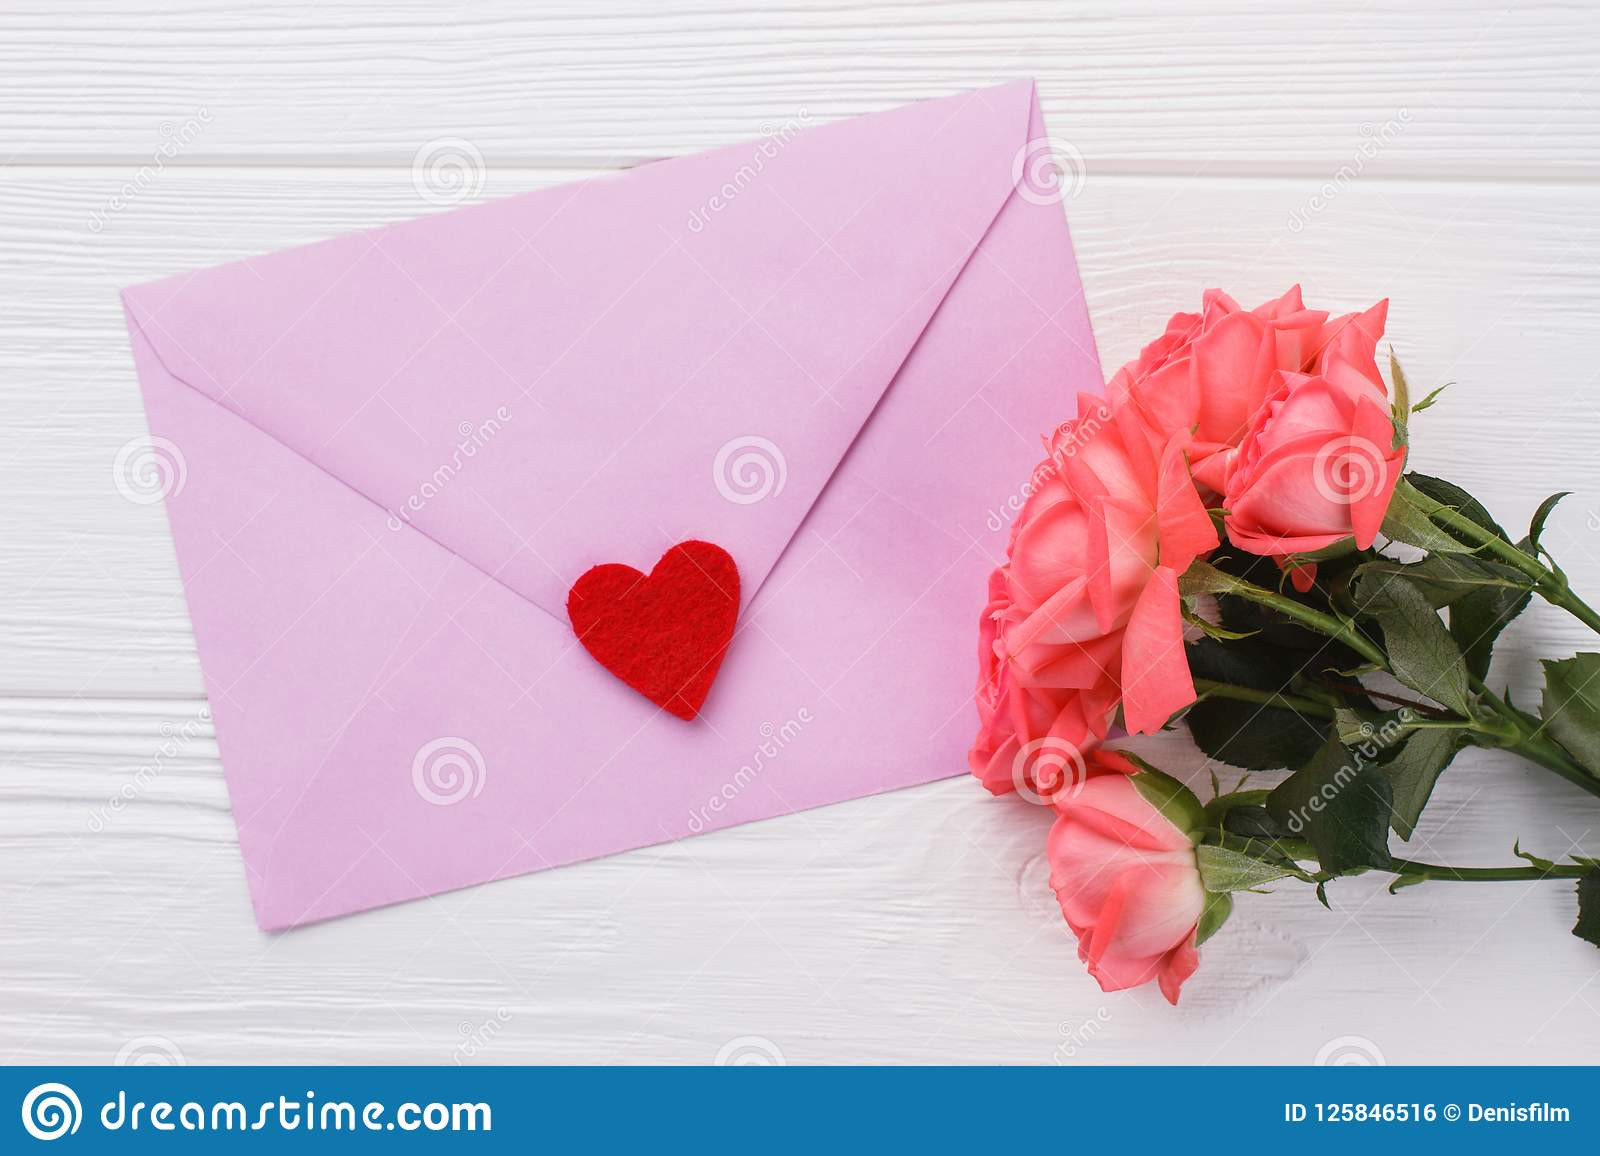 Romantic Valentines Day Gift
 Romantic Gift For Valentines Day Stock Image of